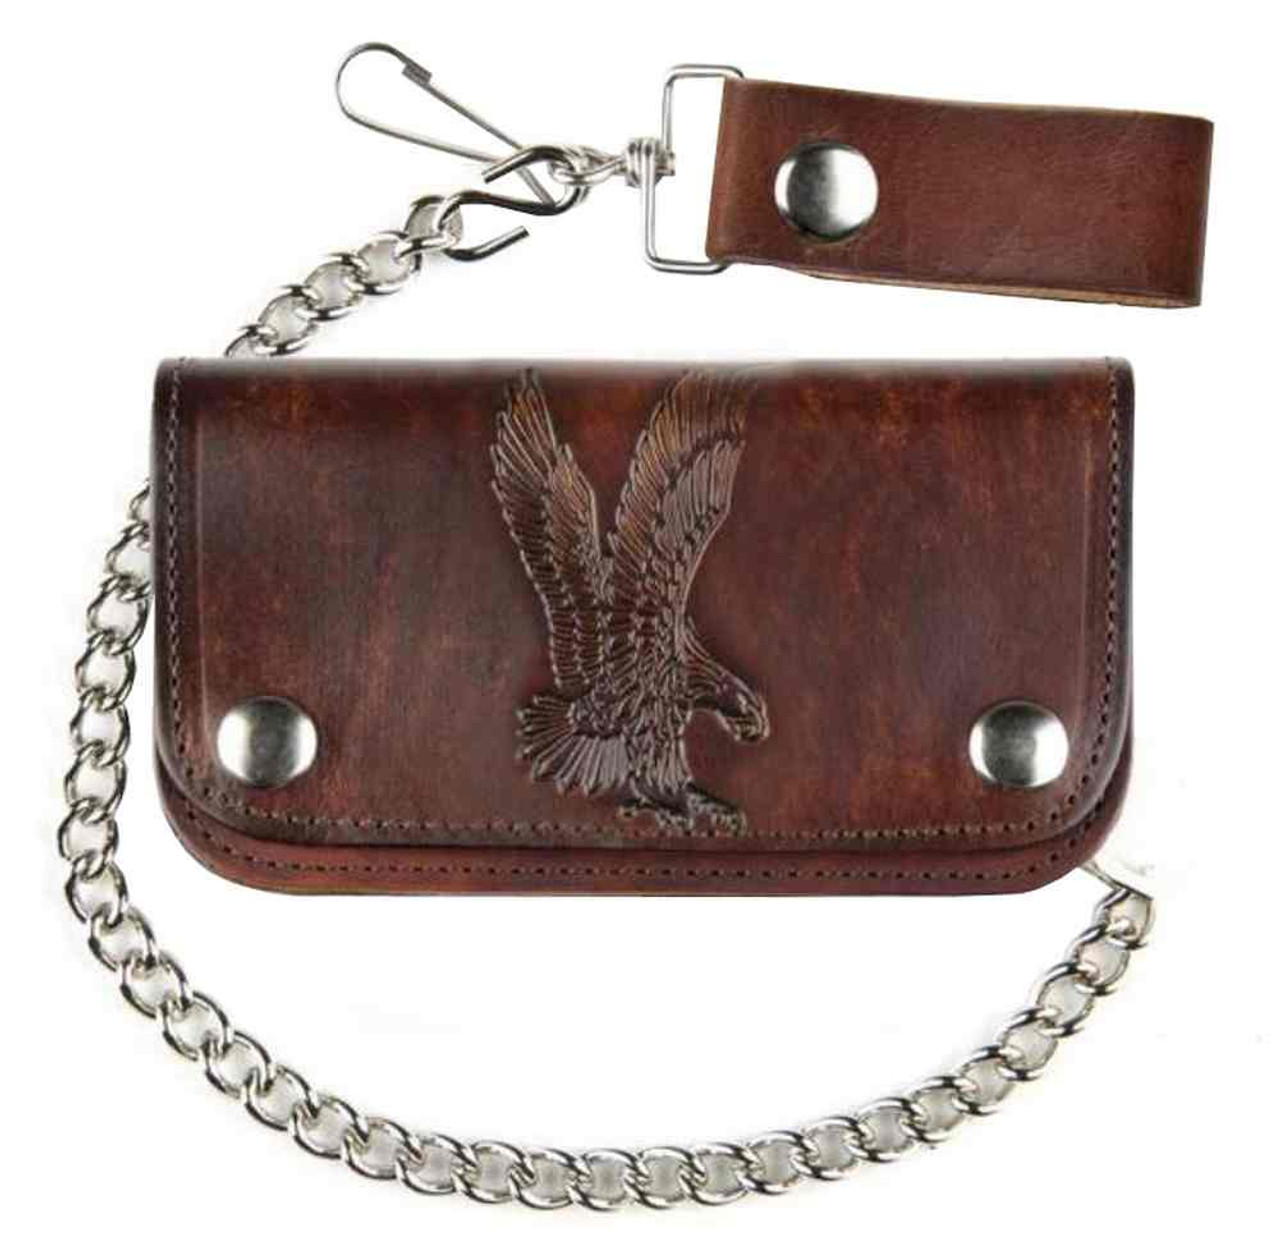 6 inch Biker Wallet - Brown Pull Up Leather – Wallets Plus